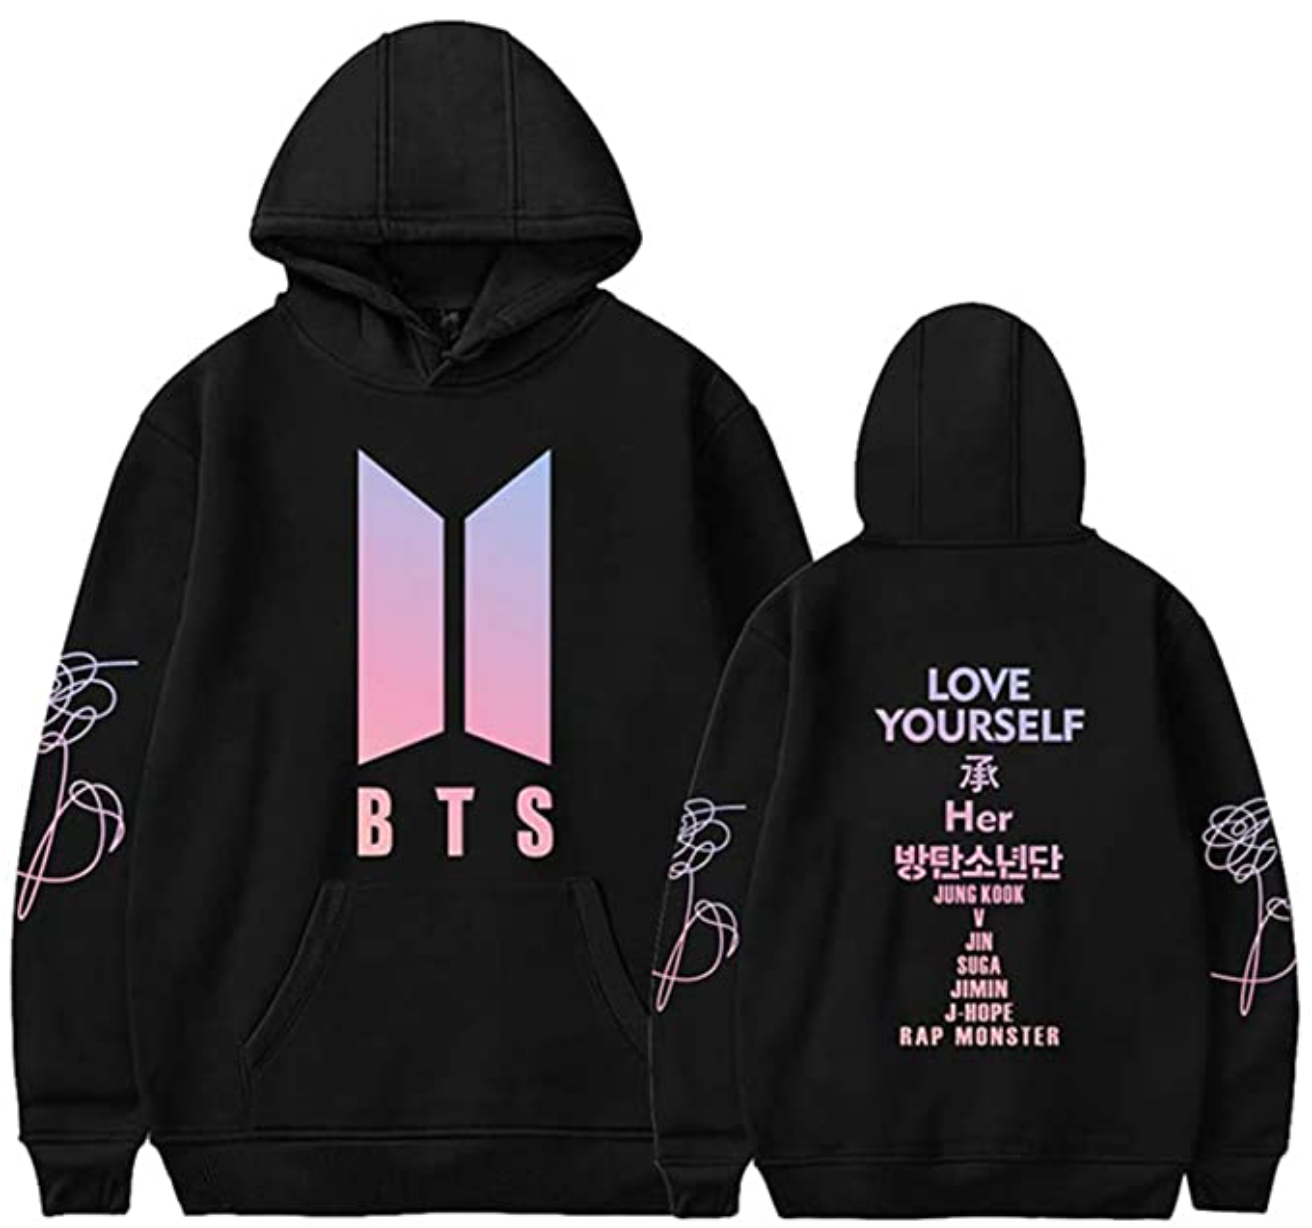 The demand for BTS merchandise is unparalleled, with fans purchasing everything from albums and posters to clothing lines endorsed by the group. This has contributed to the growth of South Korea's retail industry and encouraged fans to visit the country to acquire exclusive merchandise.]]>